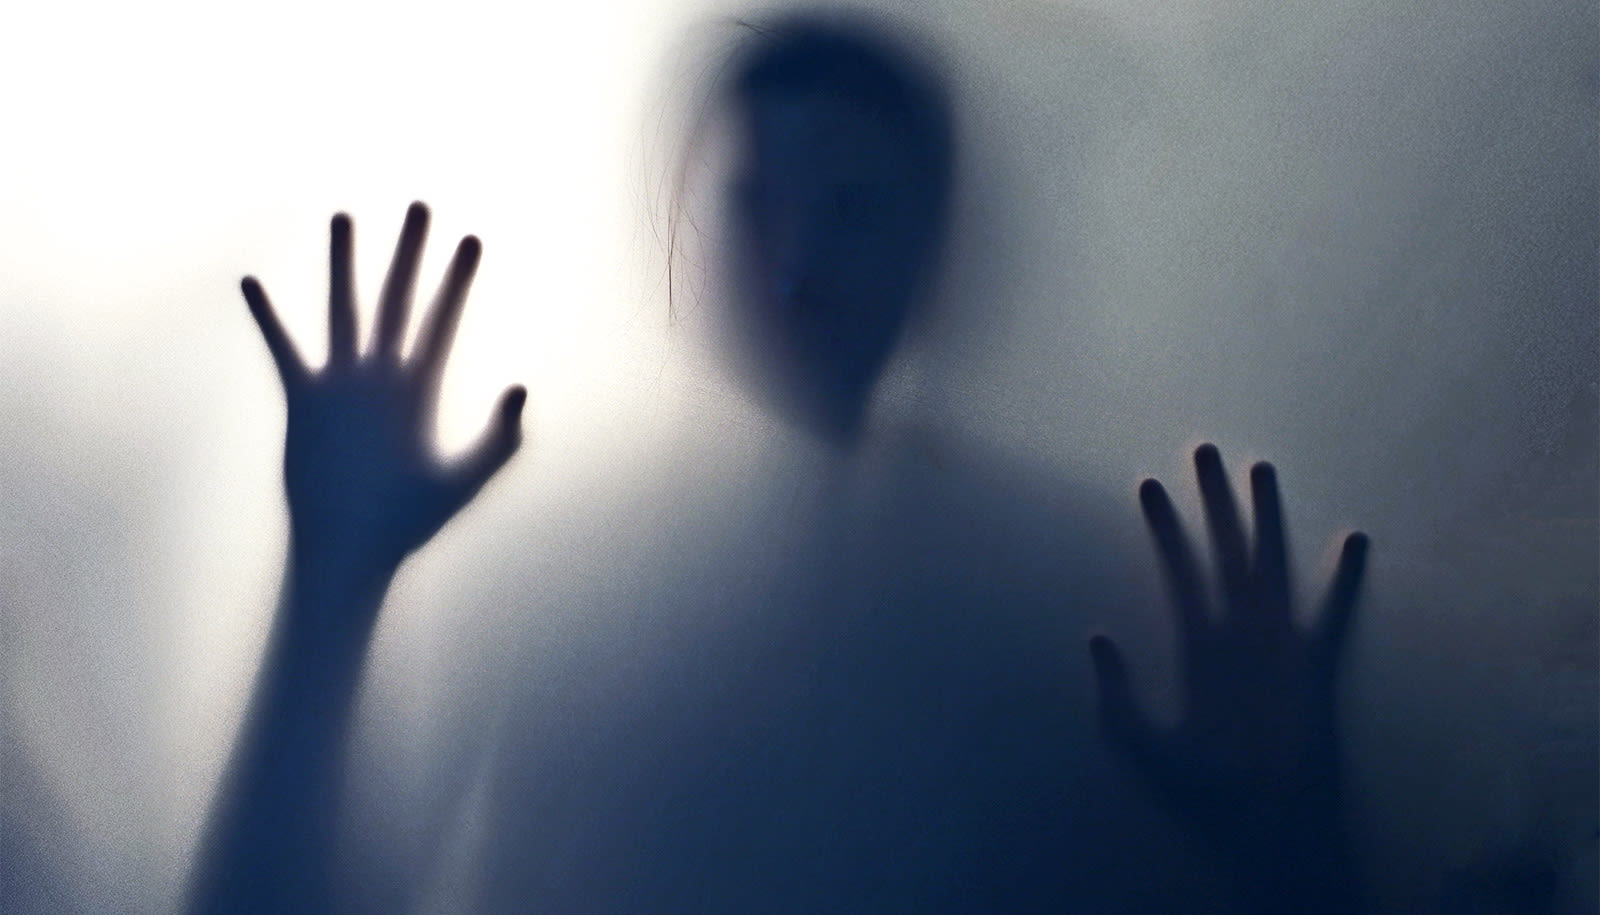 Nightmares could be a sign of autoimmune disease